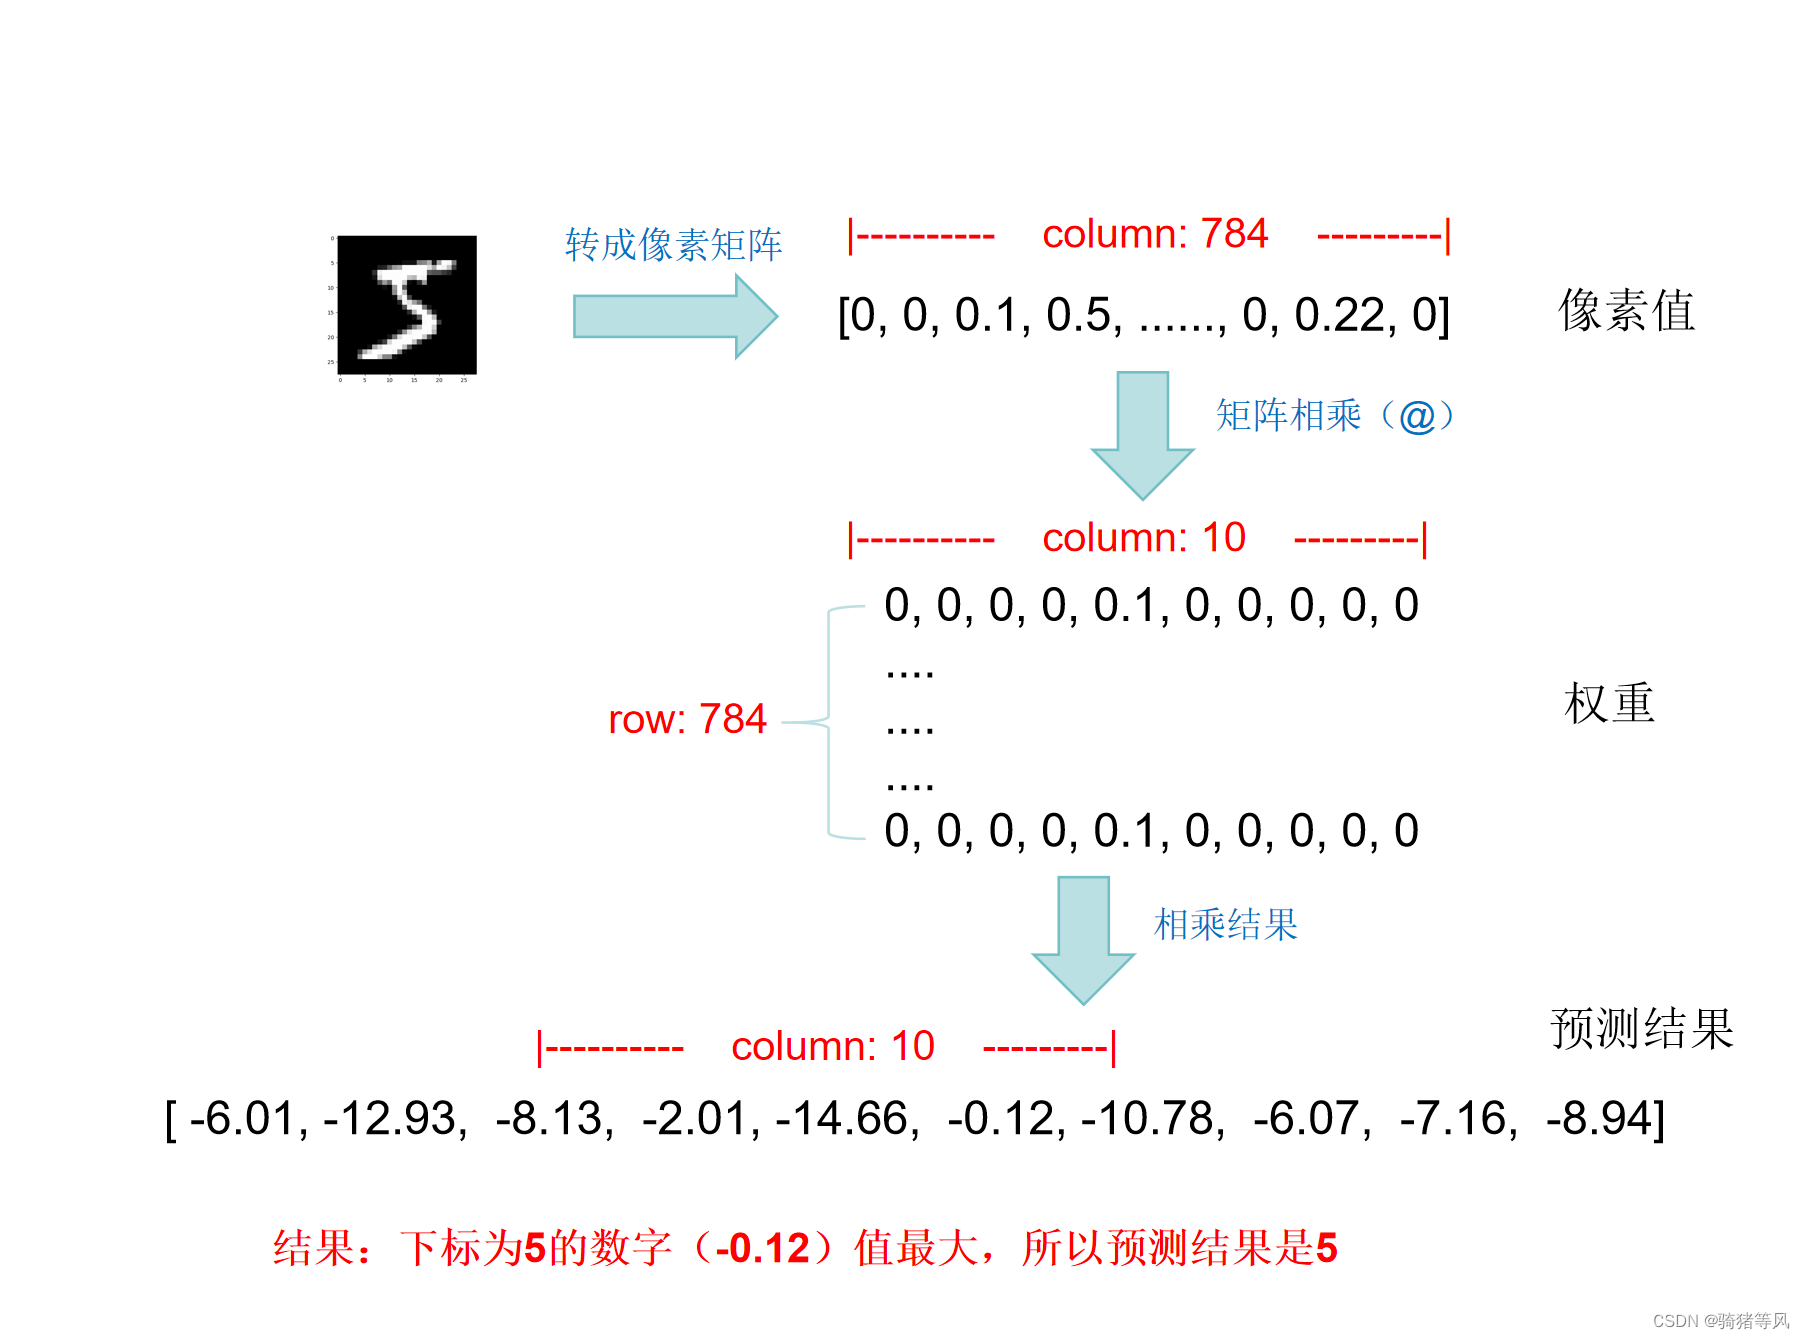 PyTorch<span style='color:red;'>官</span><span style='color:red;'>网</span>demo解读——第一<span style='color:red;'>个</span>神经网络（2） 上<span style='color:red;'>一</span>篇：PyTorch<span style='color:red;'>官</span><span style='color:red;'>网</span>demo解读——第一<span style='color:red;'>个</span>神经网络（1）